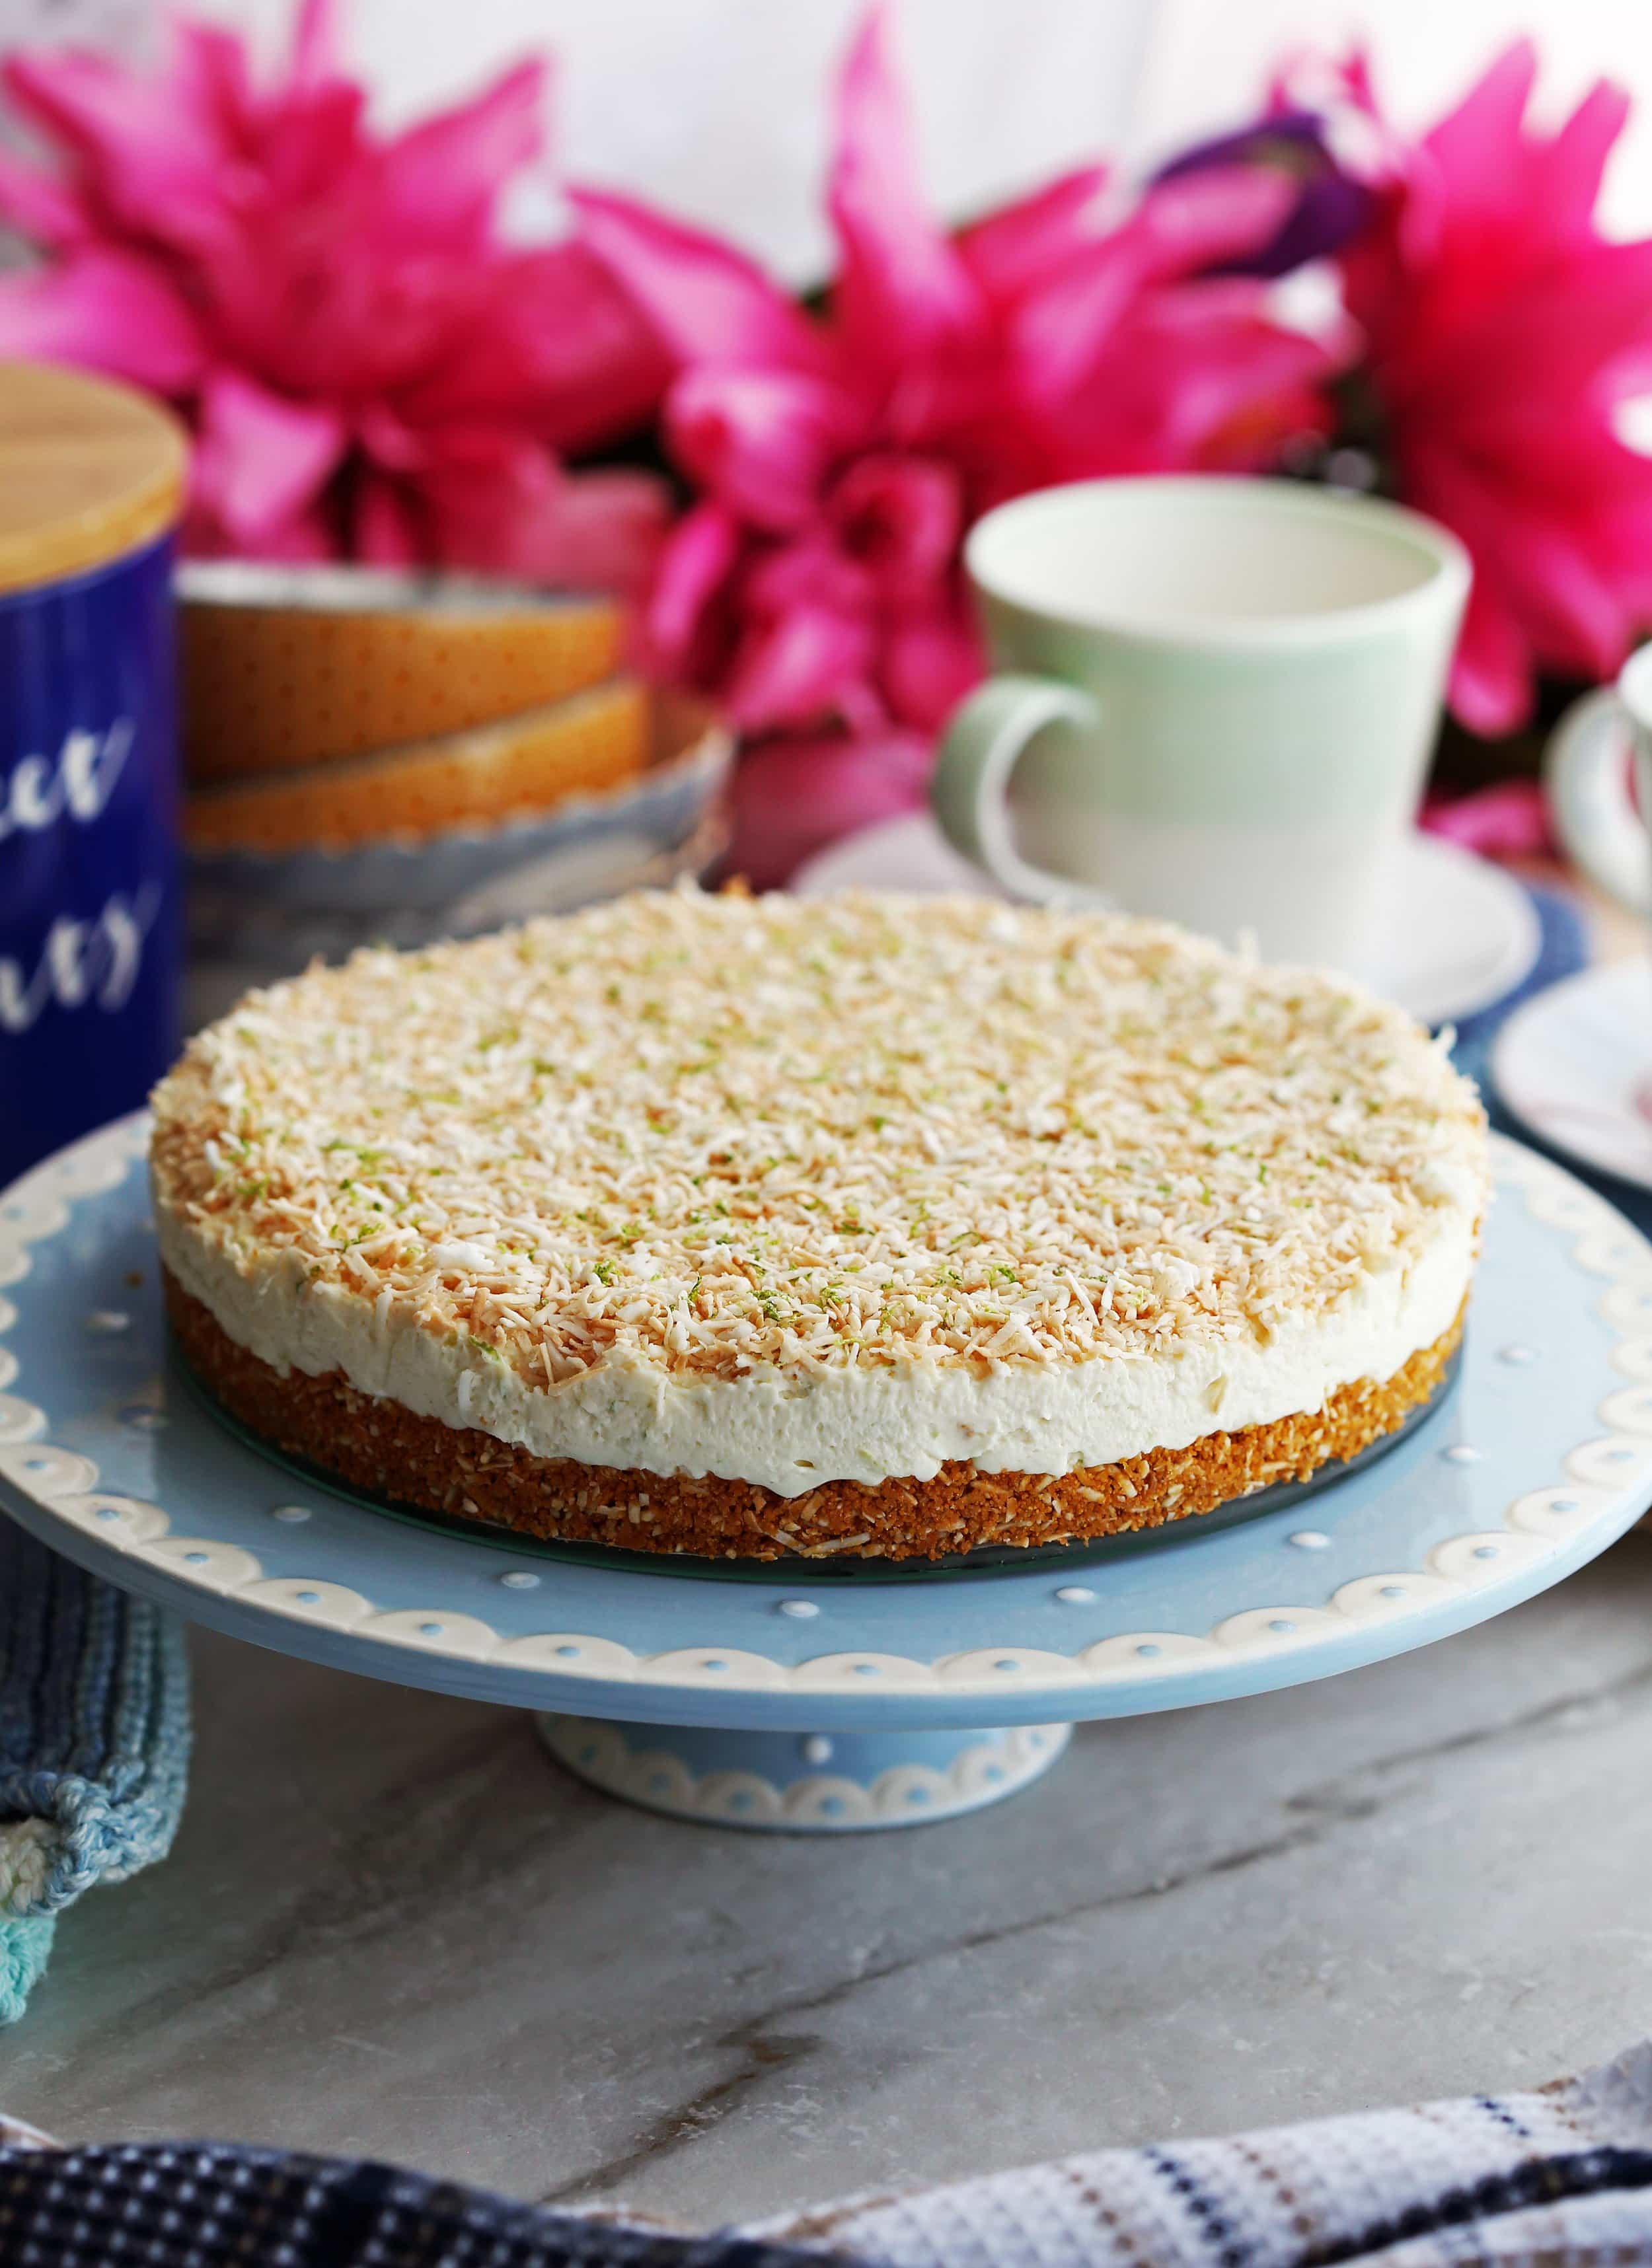 A whole uncut no-bake coconut lime mascarpone cheesecake on a elevated blue cake platter.